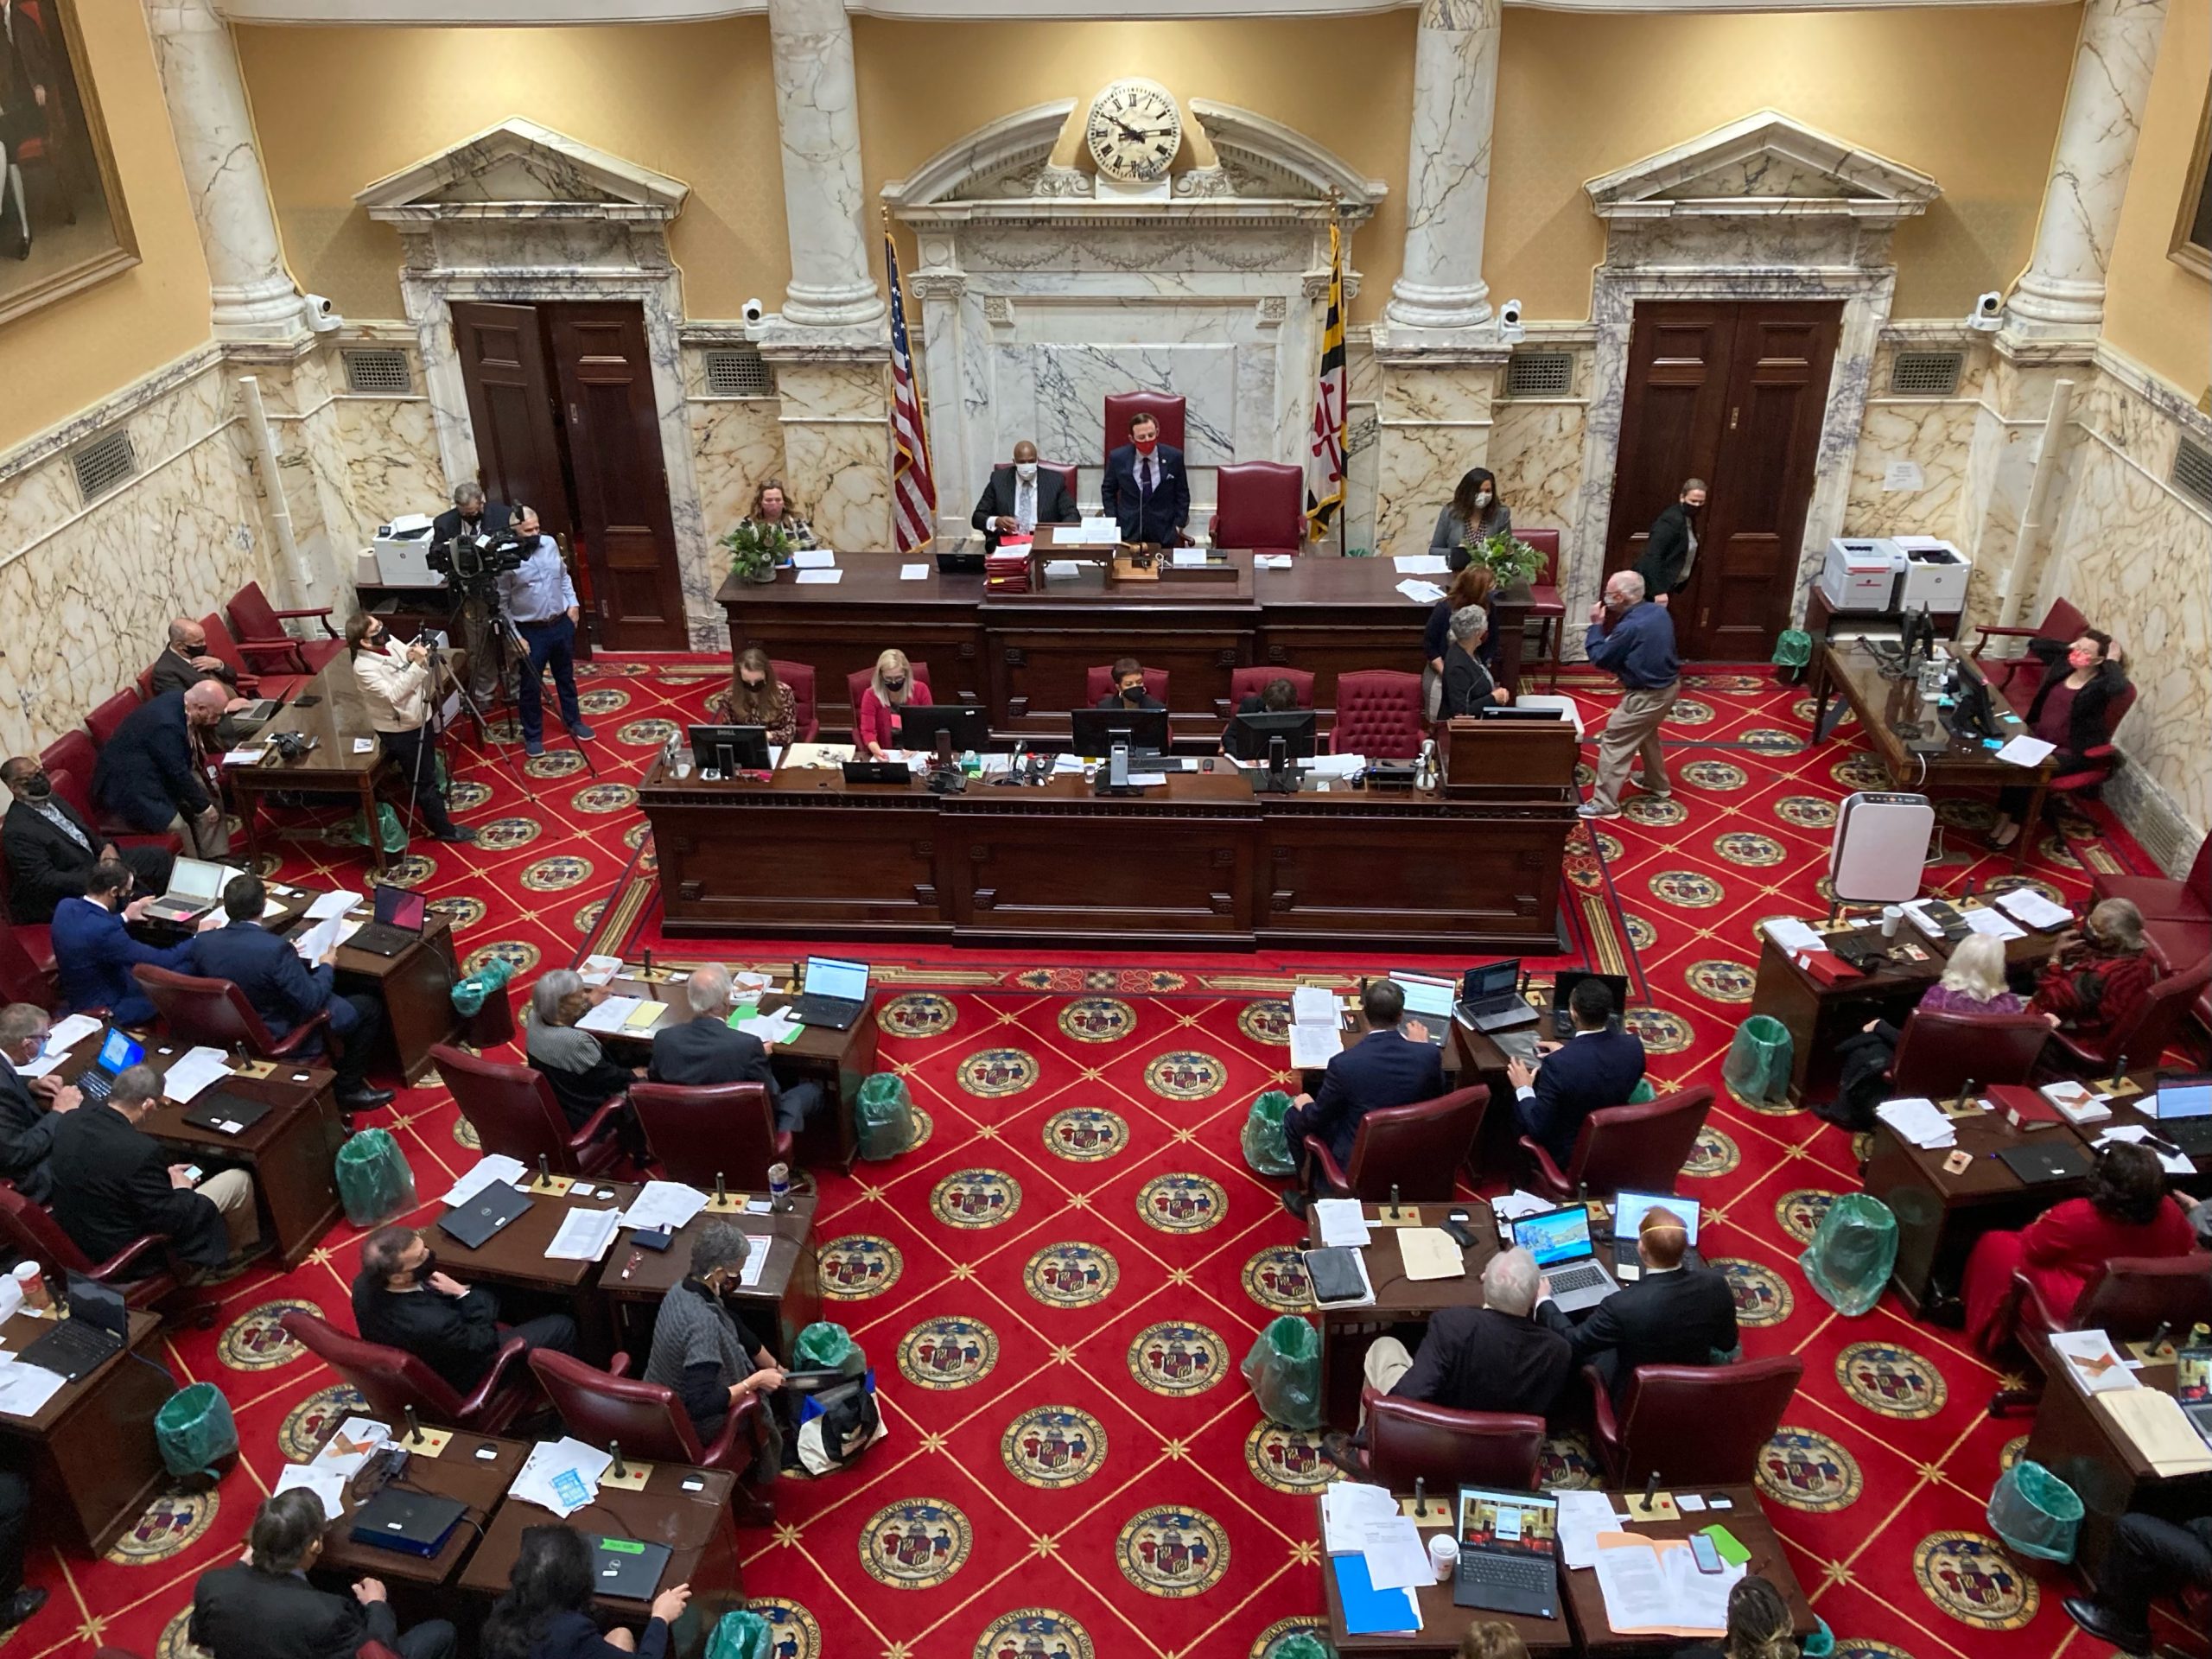 The Maryland State Senate met Dec. 6, 2021, to introduce congressional redistricting bills and override vetoes from Gov. Larry Hogan. (Allison Mollenkamp/Capital News Service)